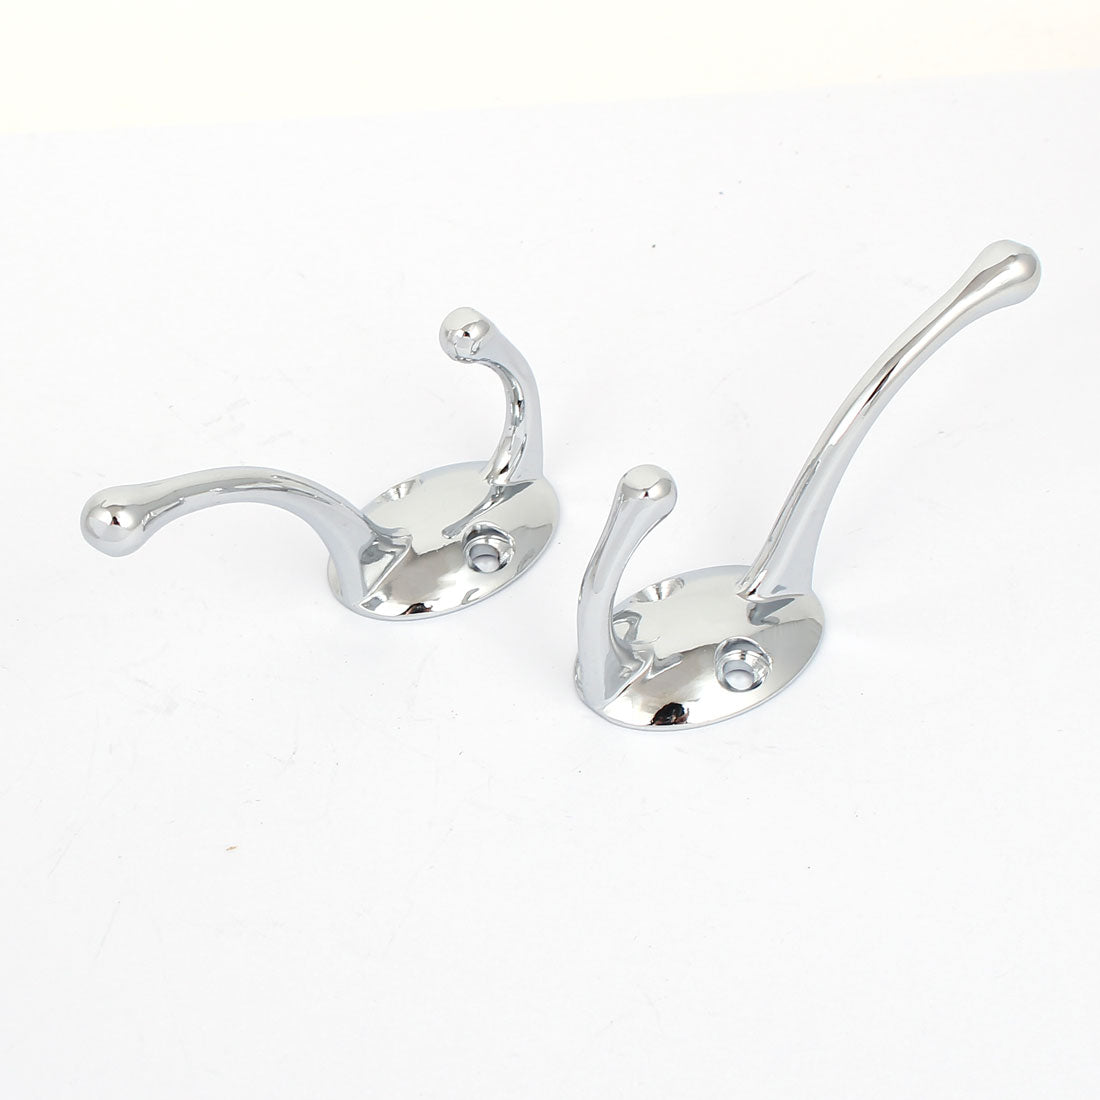 uxcell Uxcell Wall Mount Chrome Finished Double Hooks Hanger 10 Pcs for Hat Coat Clothes Towel